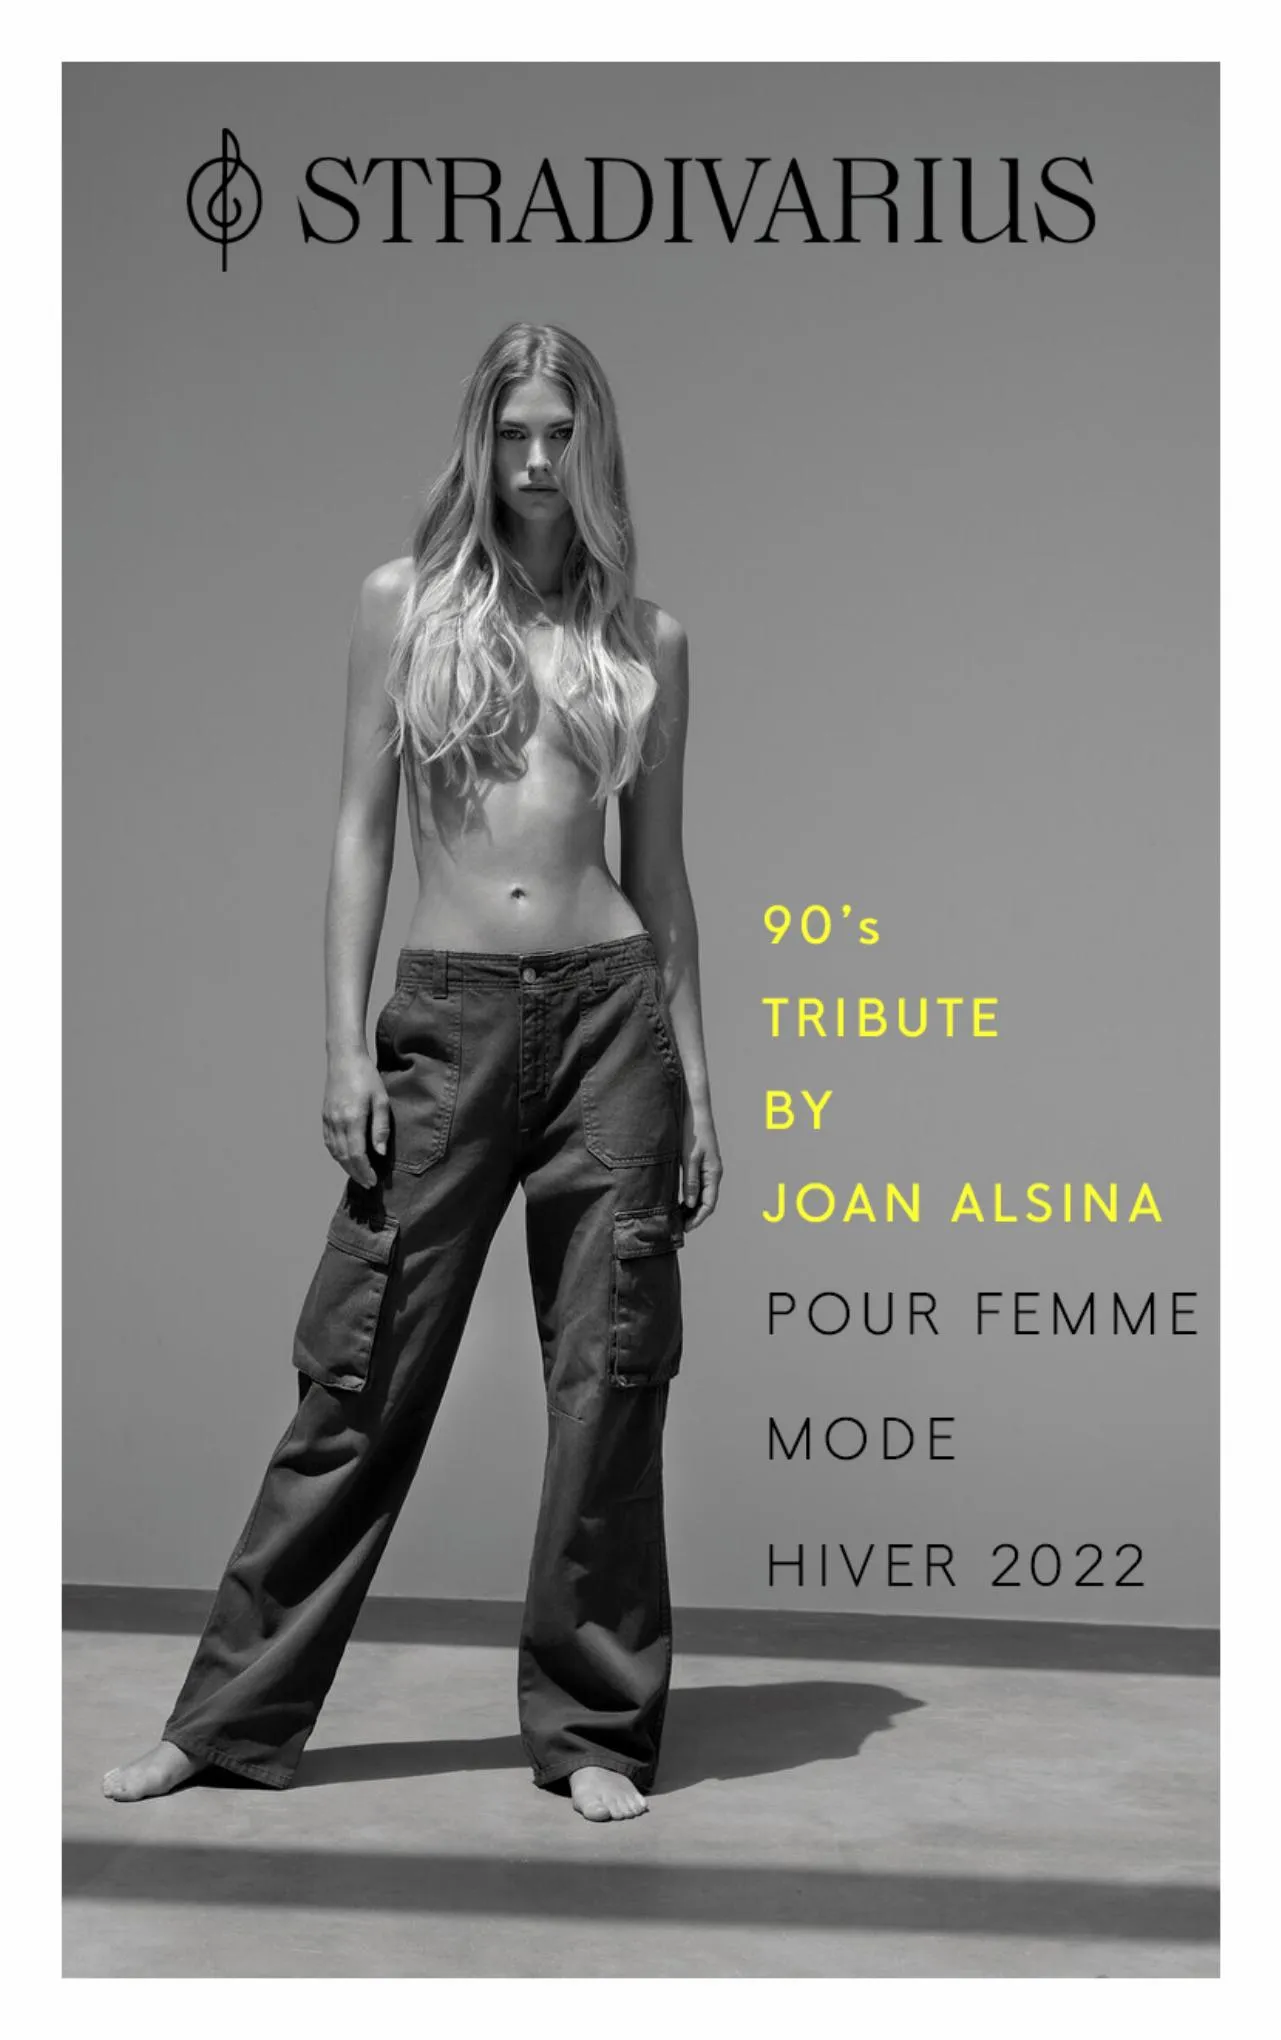 Catalogue 90's Tribute by Joan Alsina - Hiver 2022, page 00001